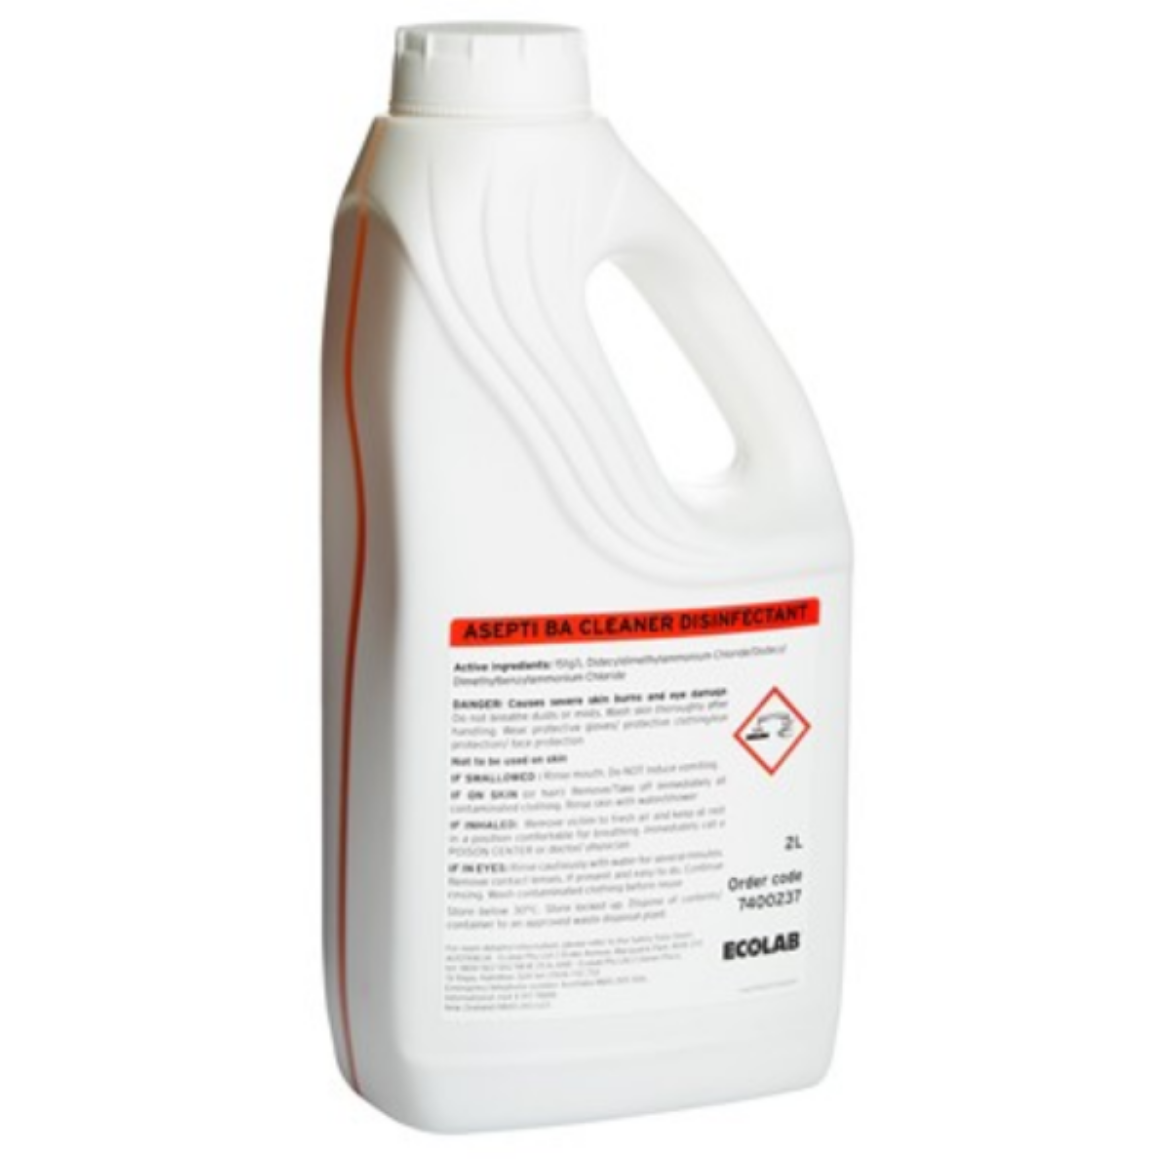 Picture of ASEPTI BA CLEANER DISINFECTANT 2LTR